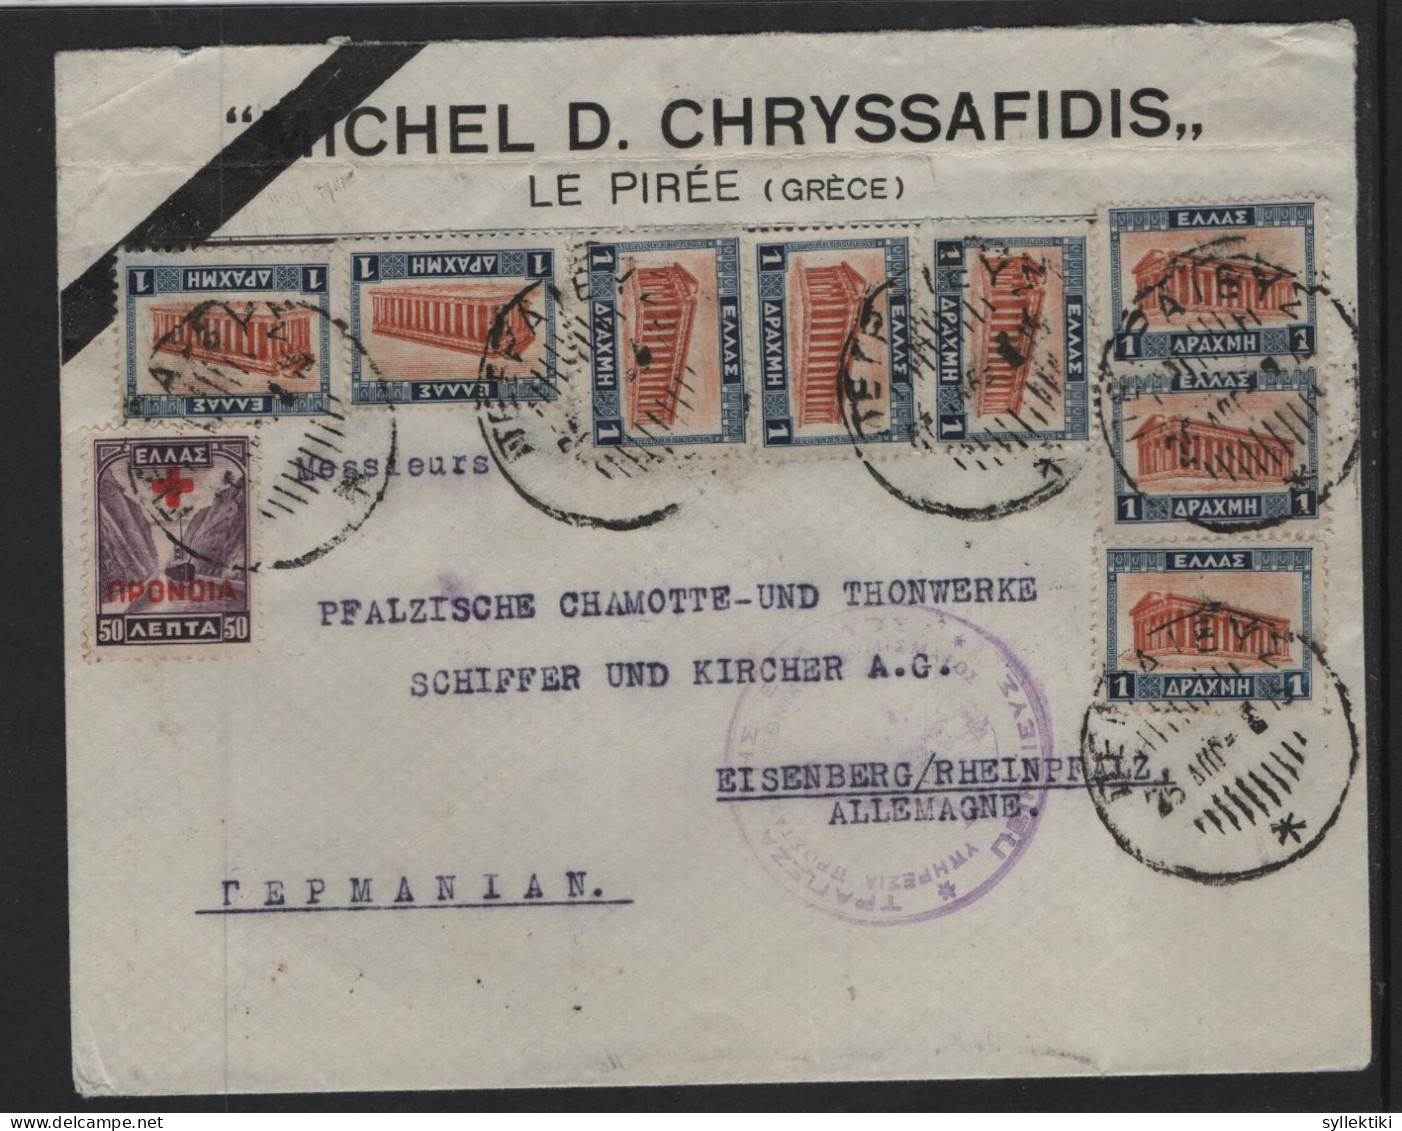 GREECE 1930s MAILED COVER TO GERMANY & EXCHANGE CONTROL CENSOR POSTMARK - Covers & Documents